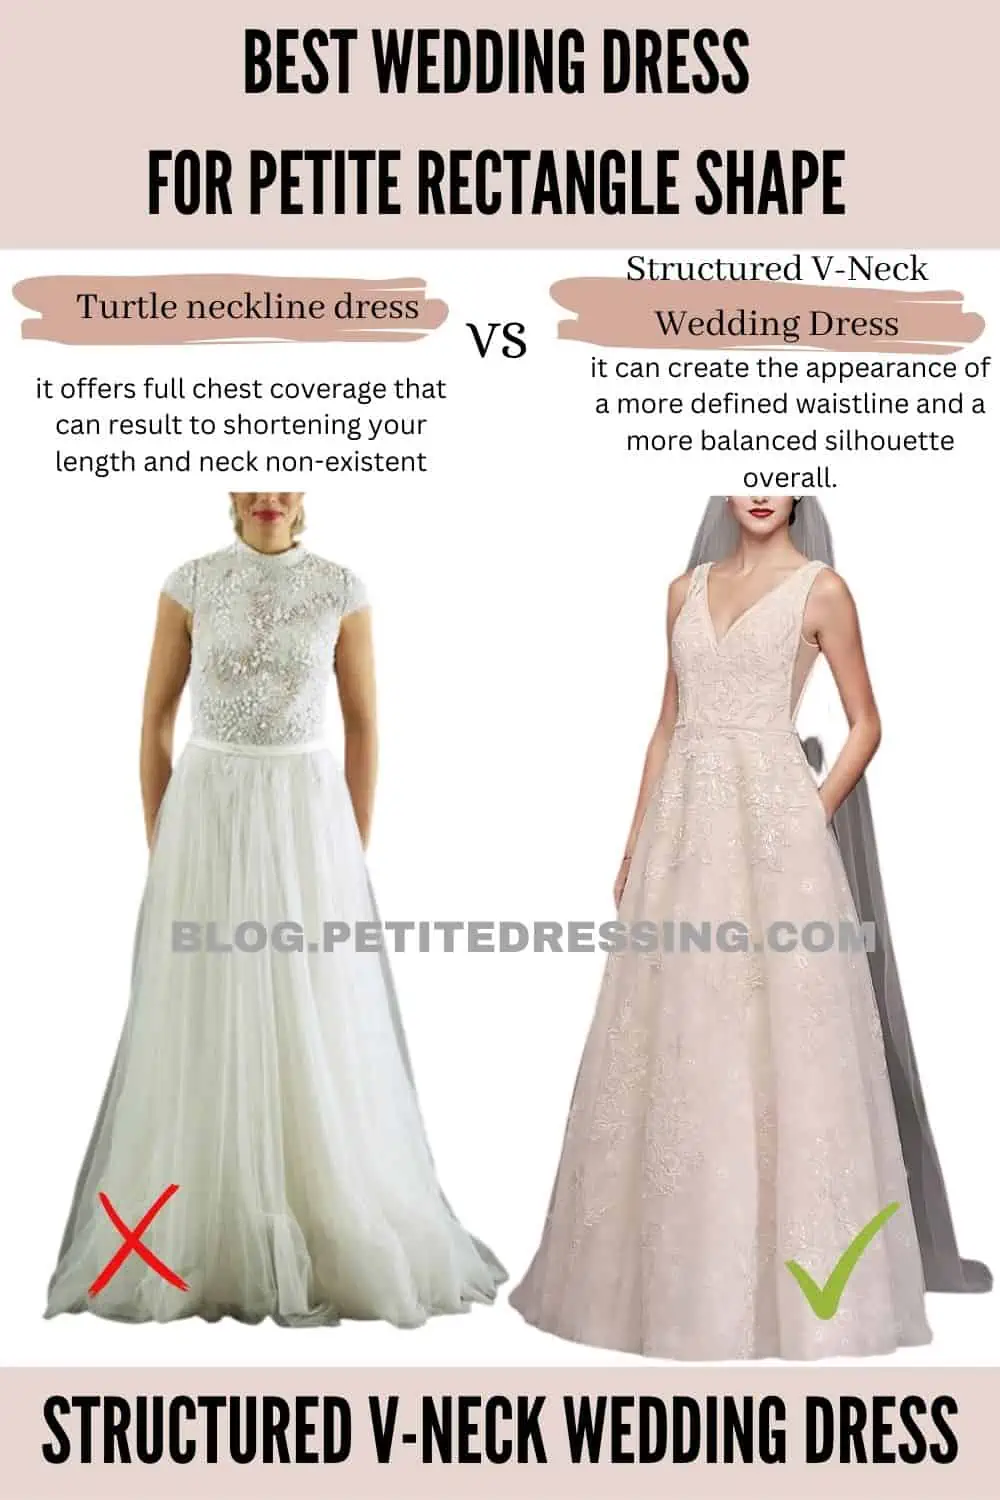 How to Find the Best Wedding Dress for Your Body Shape | Kleinfeld Bridal